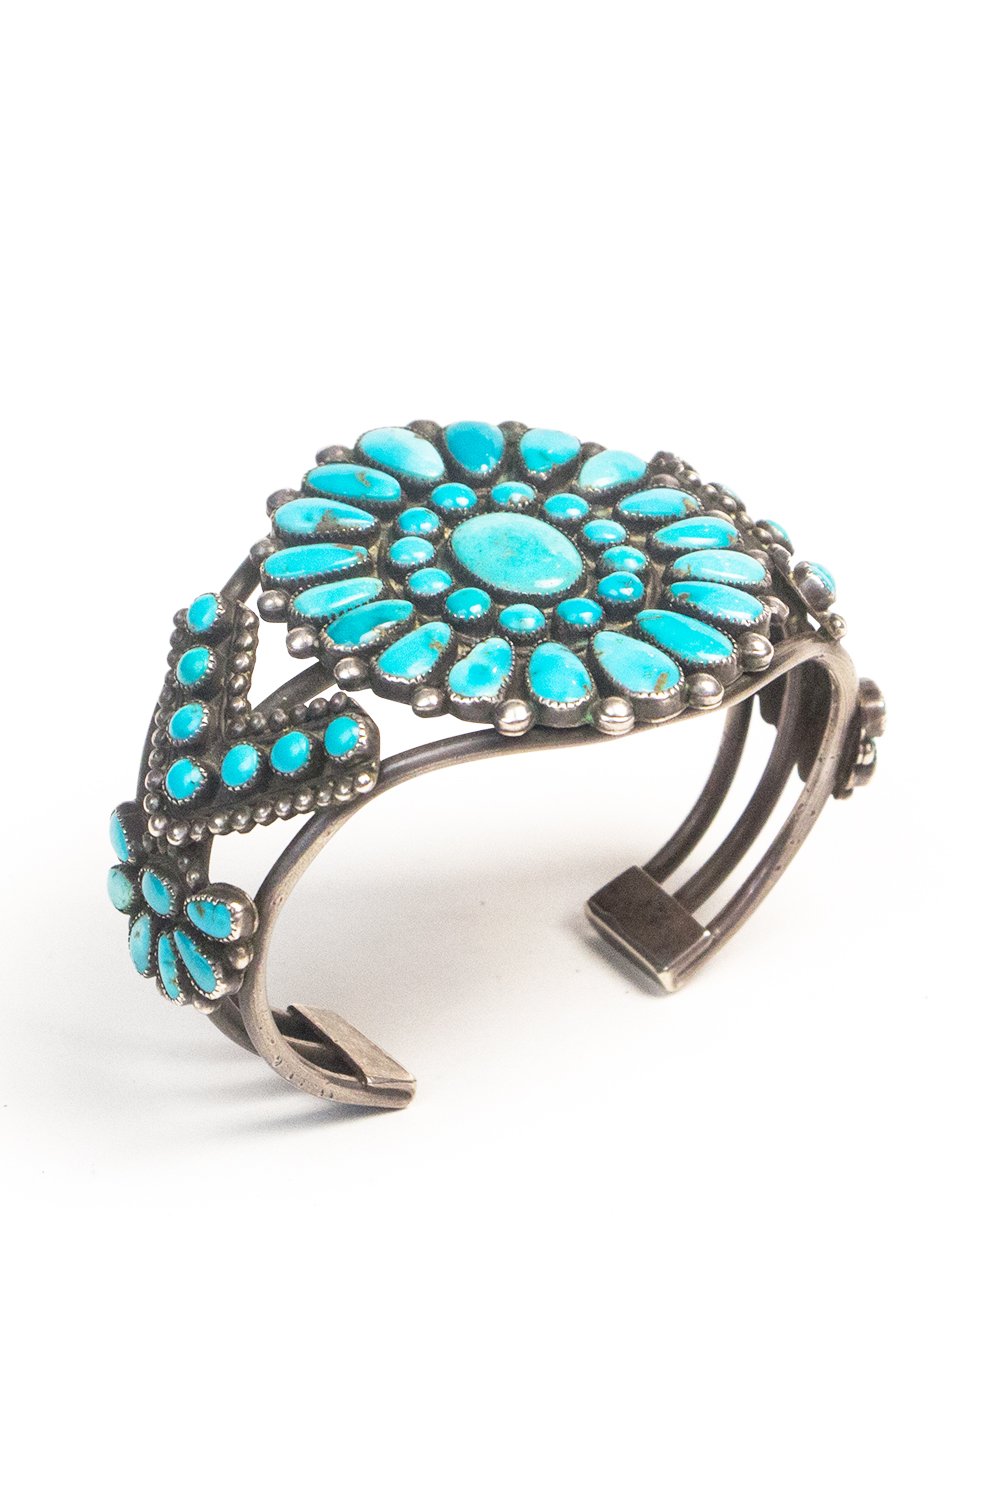 Cuff, Cluster, Turquoise, Vintage, 1940's, 2581